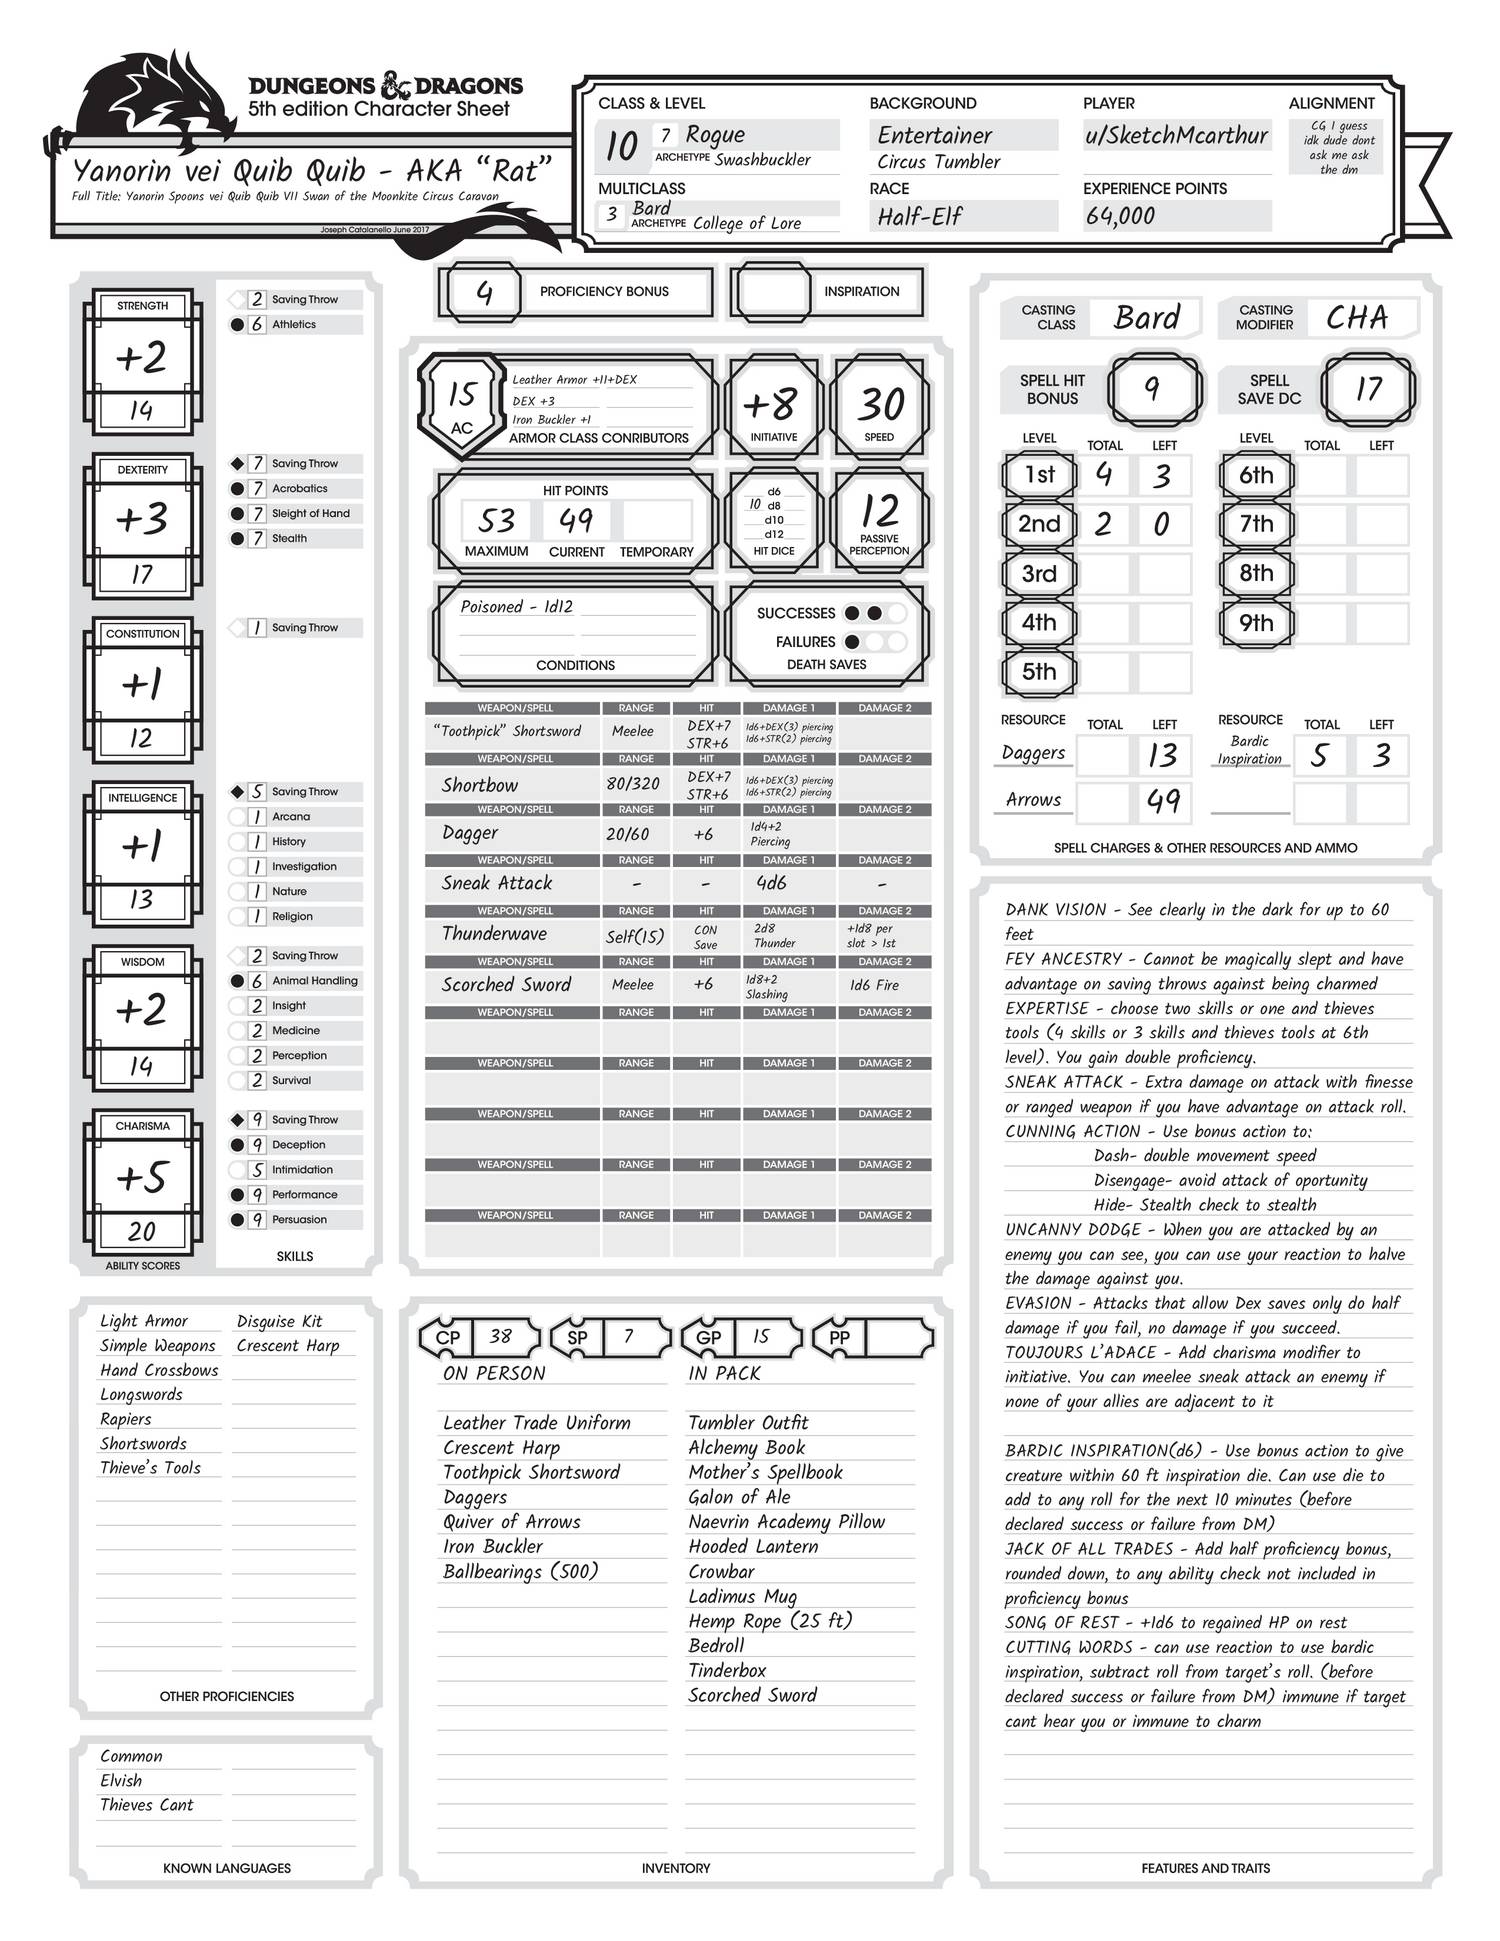 Character Sheet Example.pdf | DocDroid